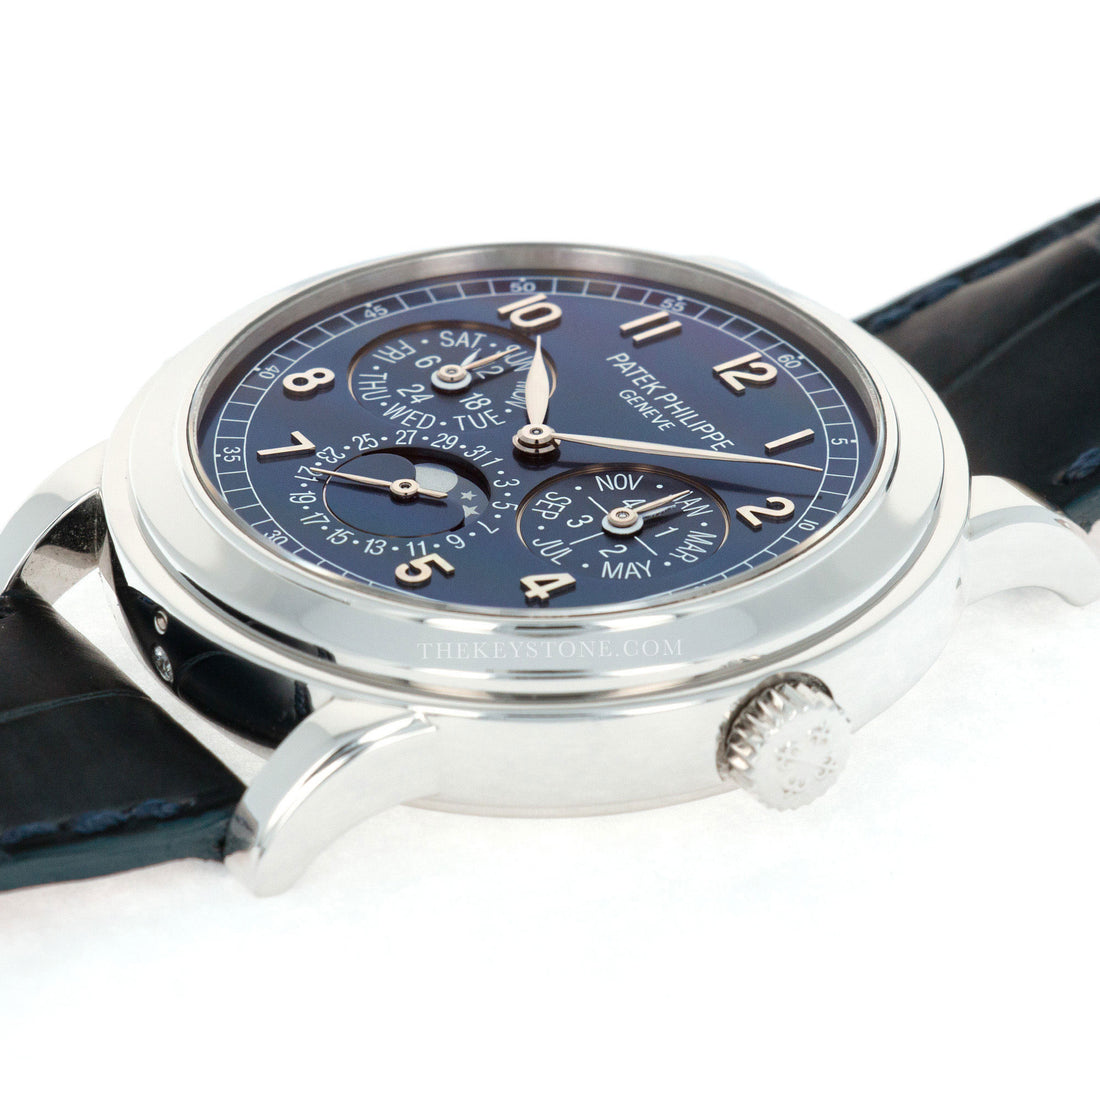 Patek Philippe Platinum Perpetual Calendar Minute Repeater Watch Ref. 5074, One of Only Two Known